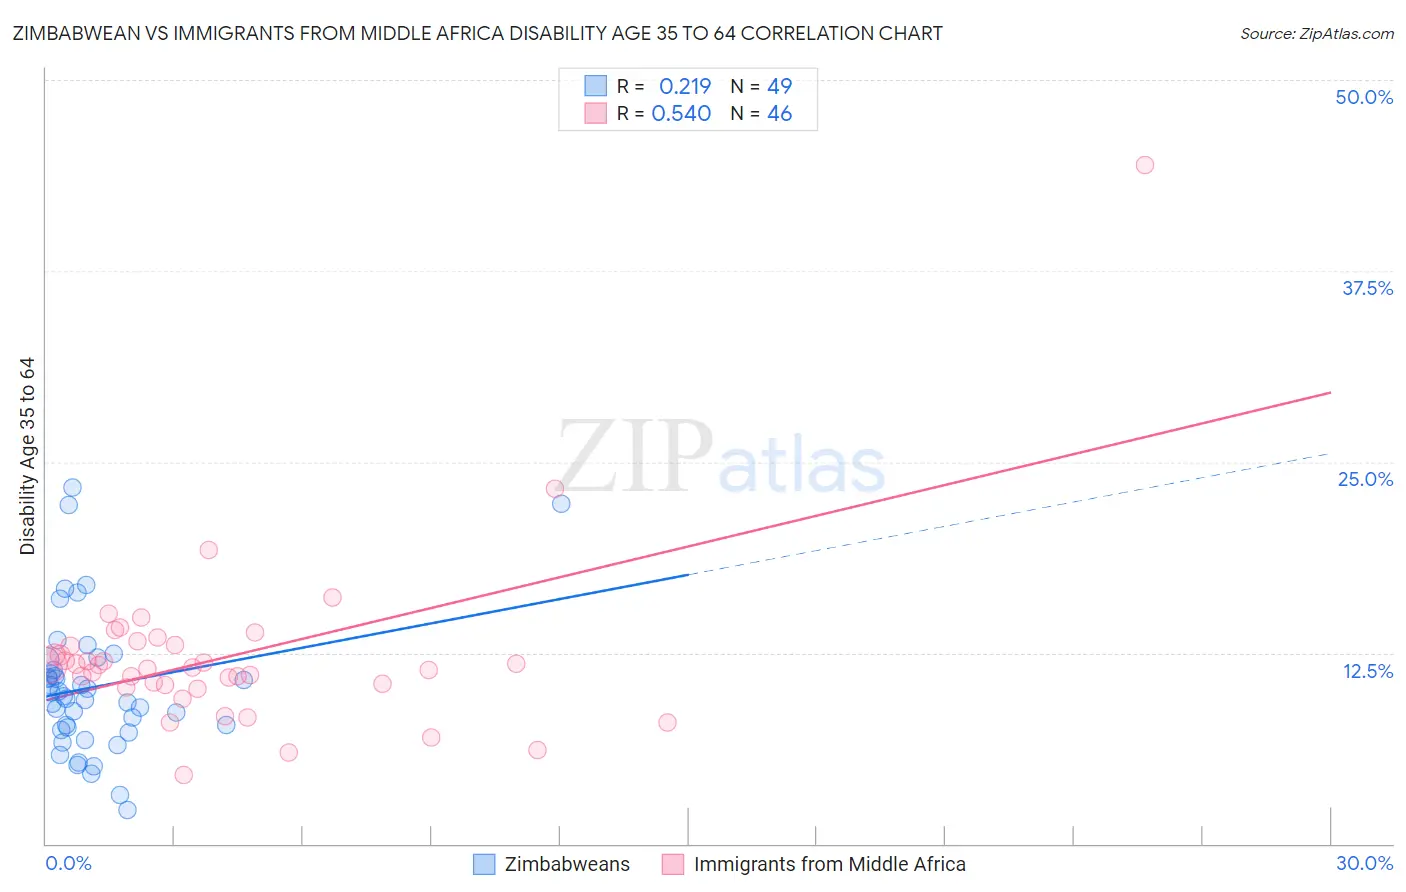 Zimbabwean vs Immigrants from Middle Africa Disability Age 35 to 64